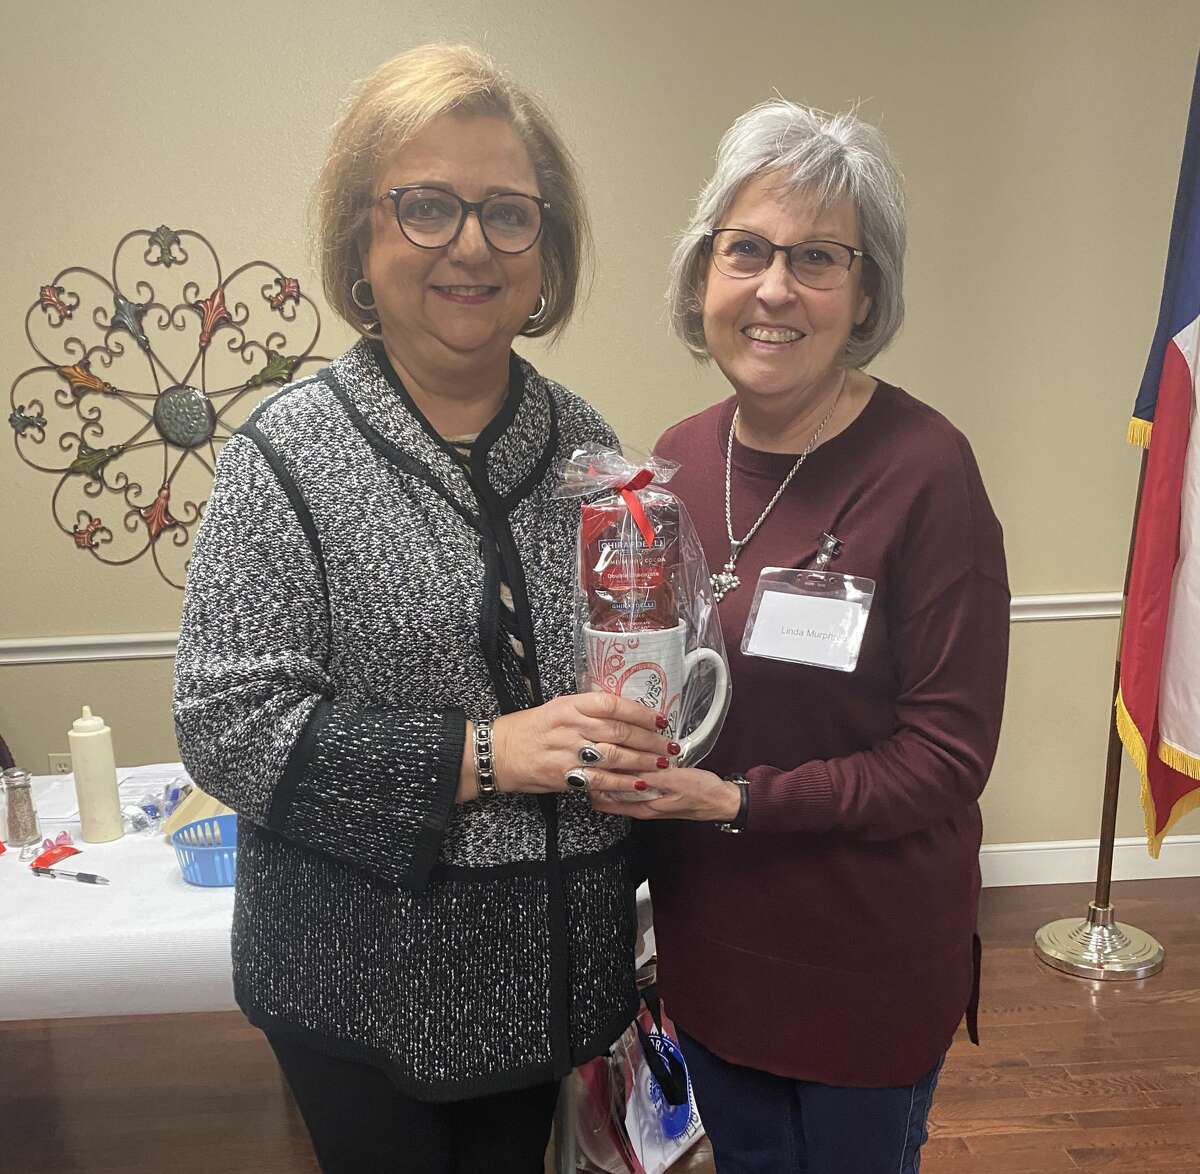 Irma Shackelford (RSVP) stands with Linda Murphree (Co-President of Plainview Area Retired School Personnel Association) for a photo after a recent PARSPA meeting.